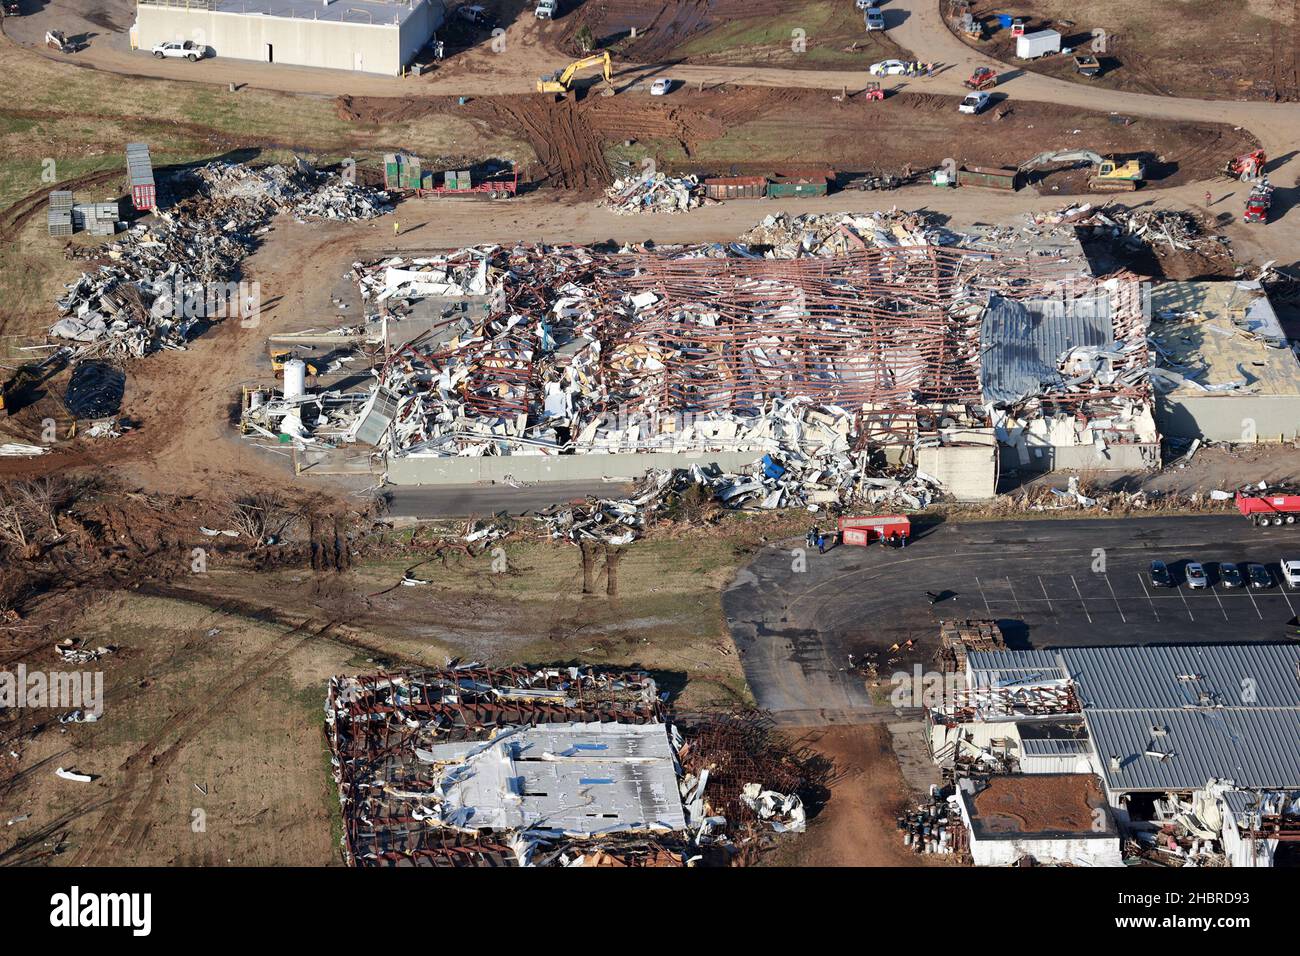 Mayfield, KY, USA. 20th Dec, 2021. Aerial view of the Mayfield Candle Factory in Mayfield, Kentucky, after rare December tornadoes ripped through Kentucky, resulting in the deaths of 78 people. Governor Beshar said, during a press conference, that there are no active search and rescue operations taking place in the state. December 20, 2021. Credit: Mpi34/Media Punch Credit: Media Punch Inc/Alamy Live News/Alamy Live News Stock Photo